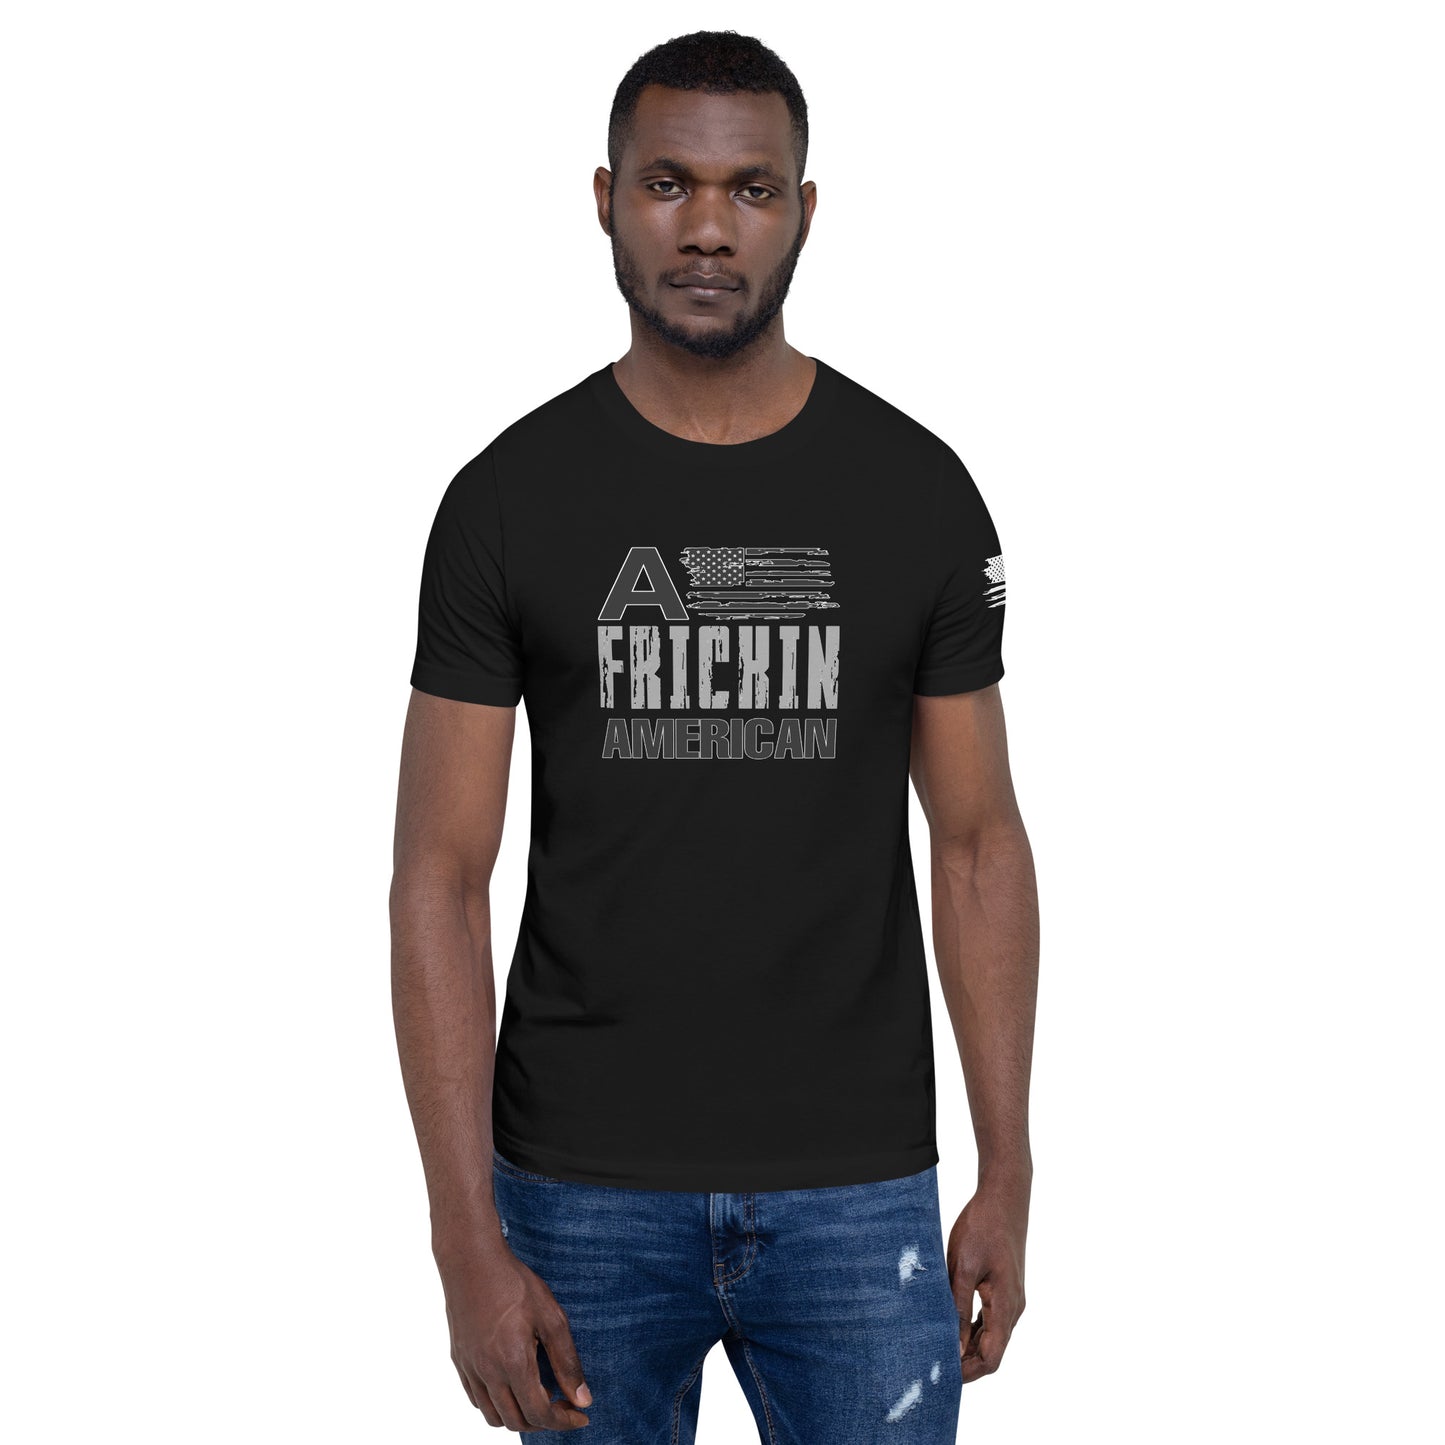 Not All Wounds Are Visible Back, A Frickin American  Design Unisex t-shirt